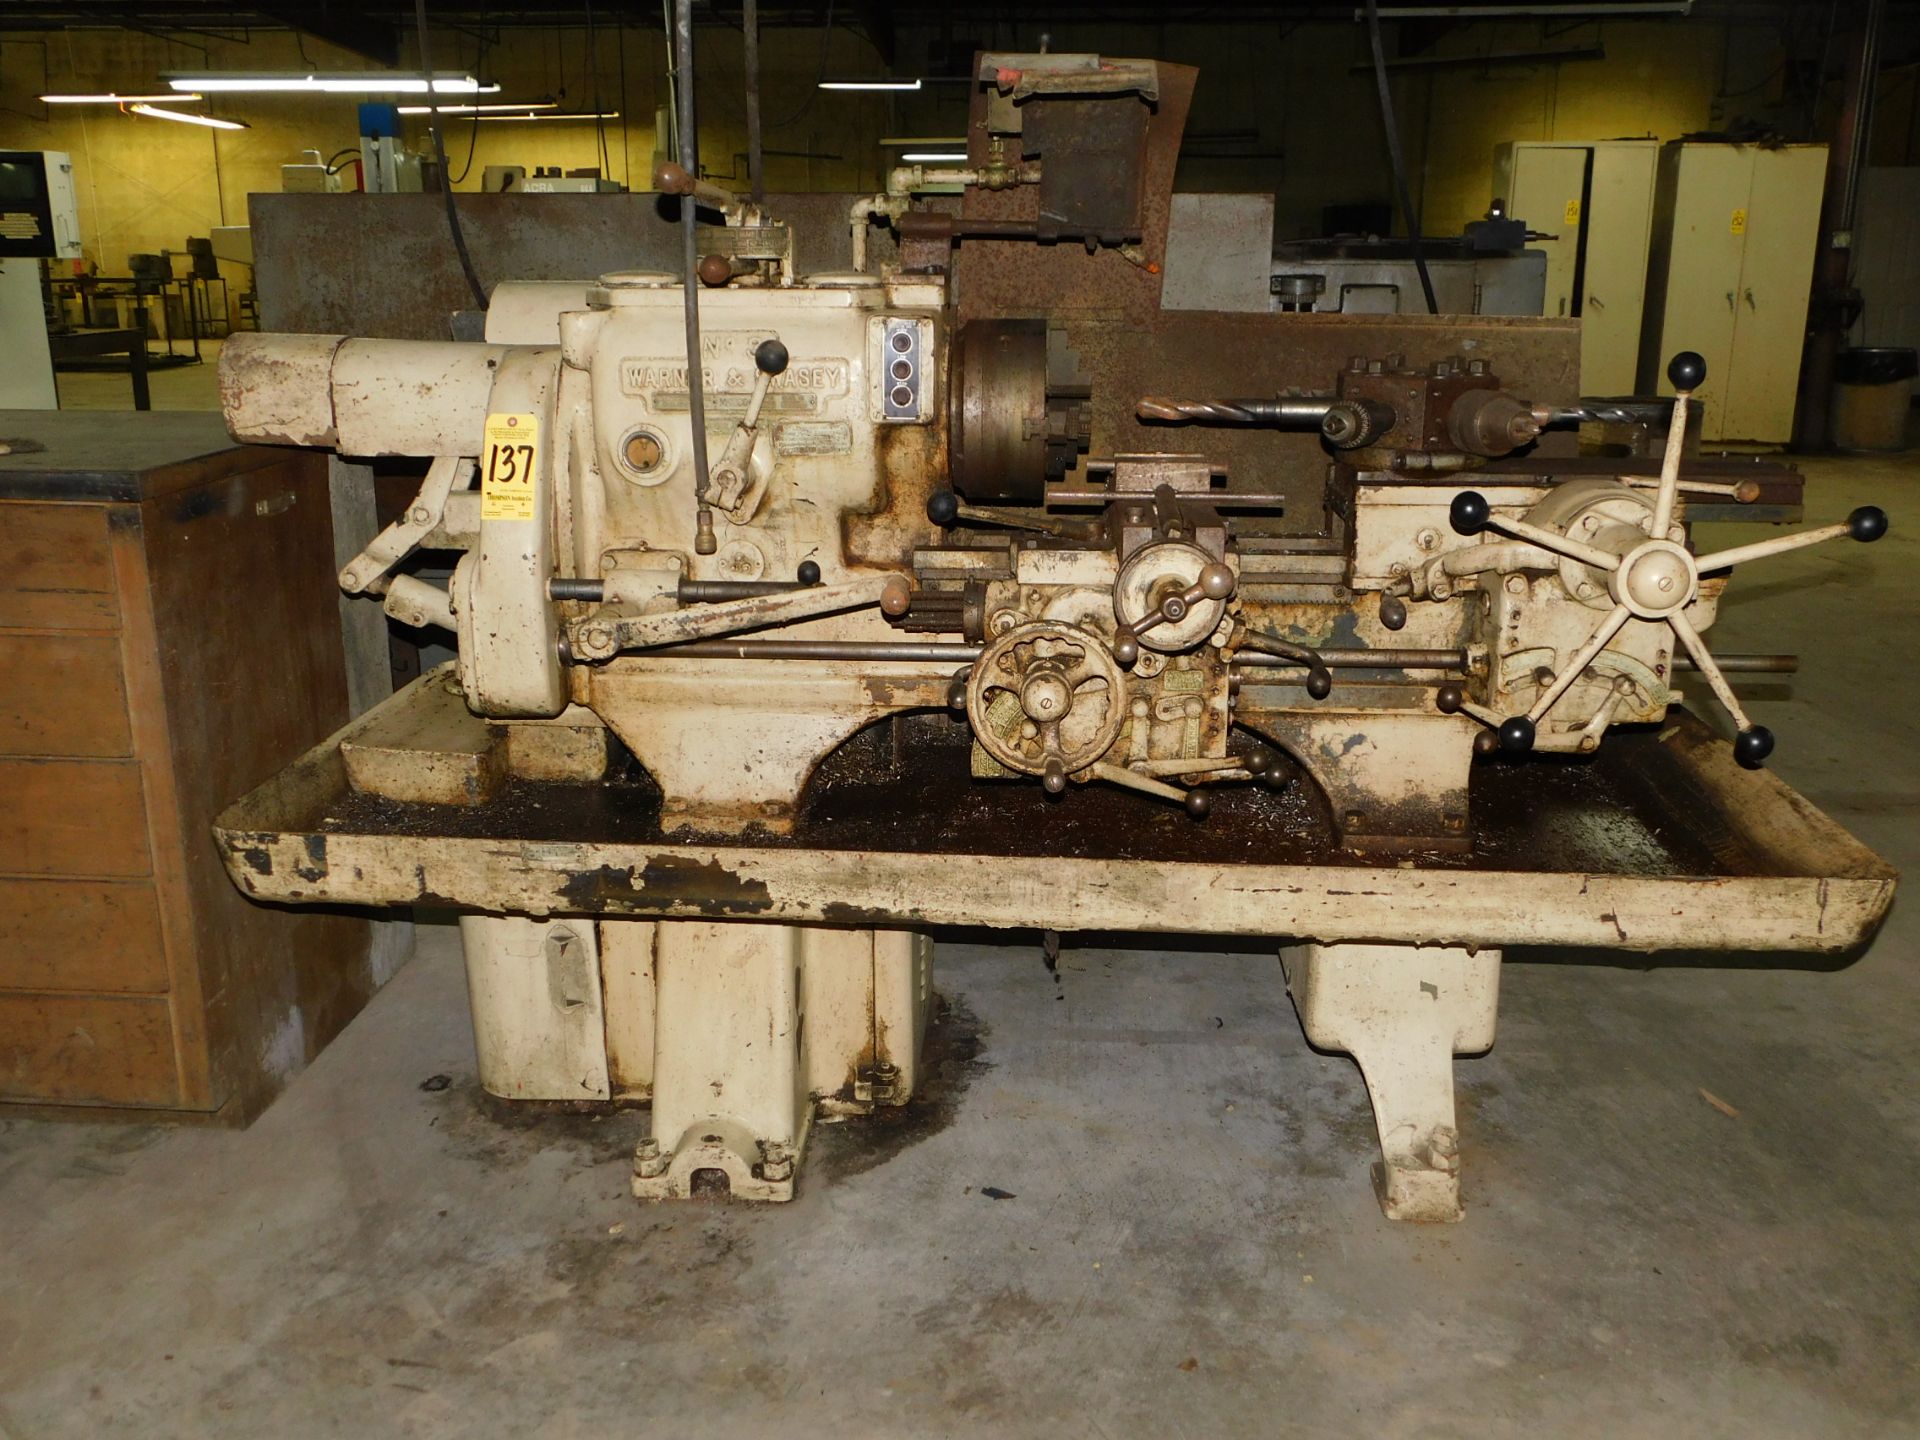 Warner & Swasey #3 Turret Lathe, s/n 522739, with (2) Cabinets of Tooling